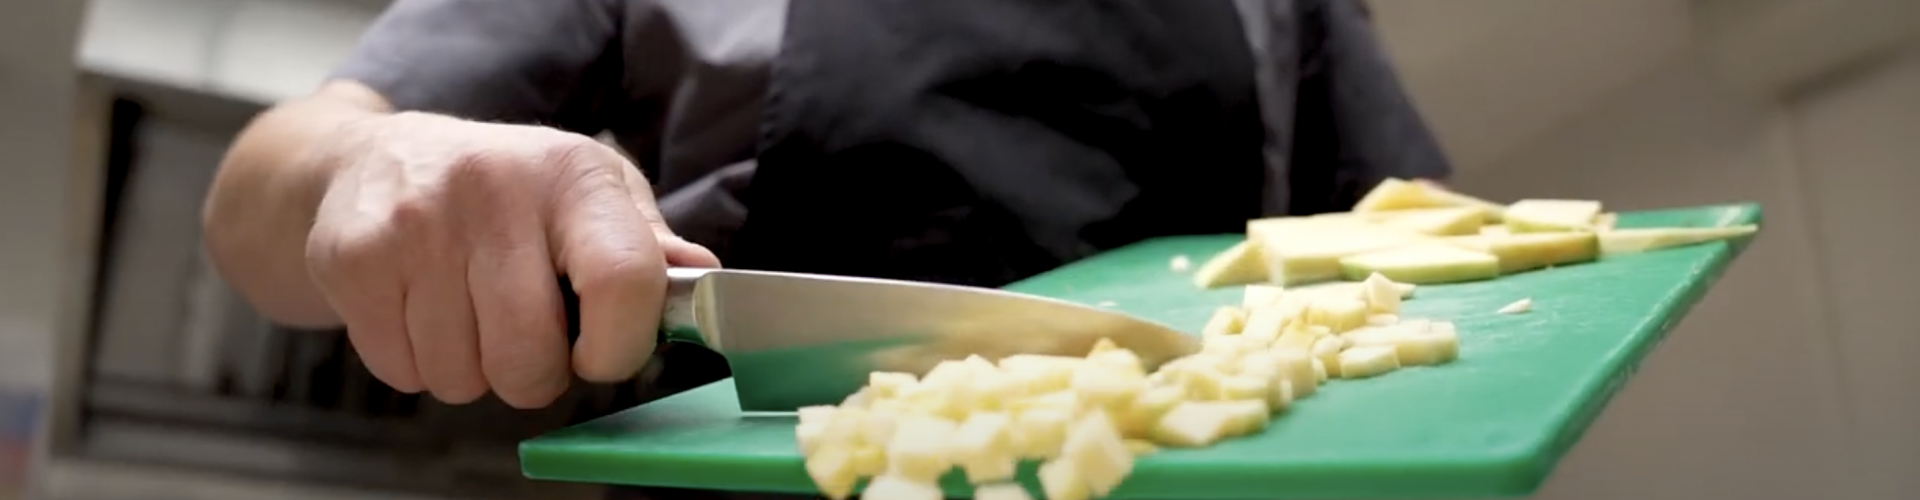 Someone using a knife to chop vegetables